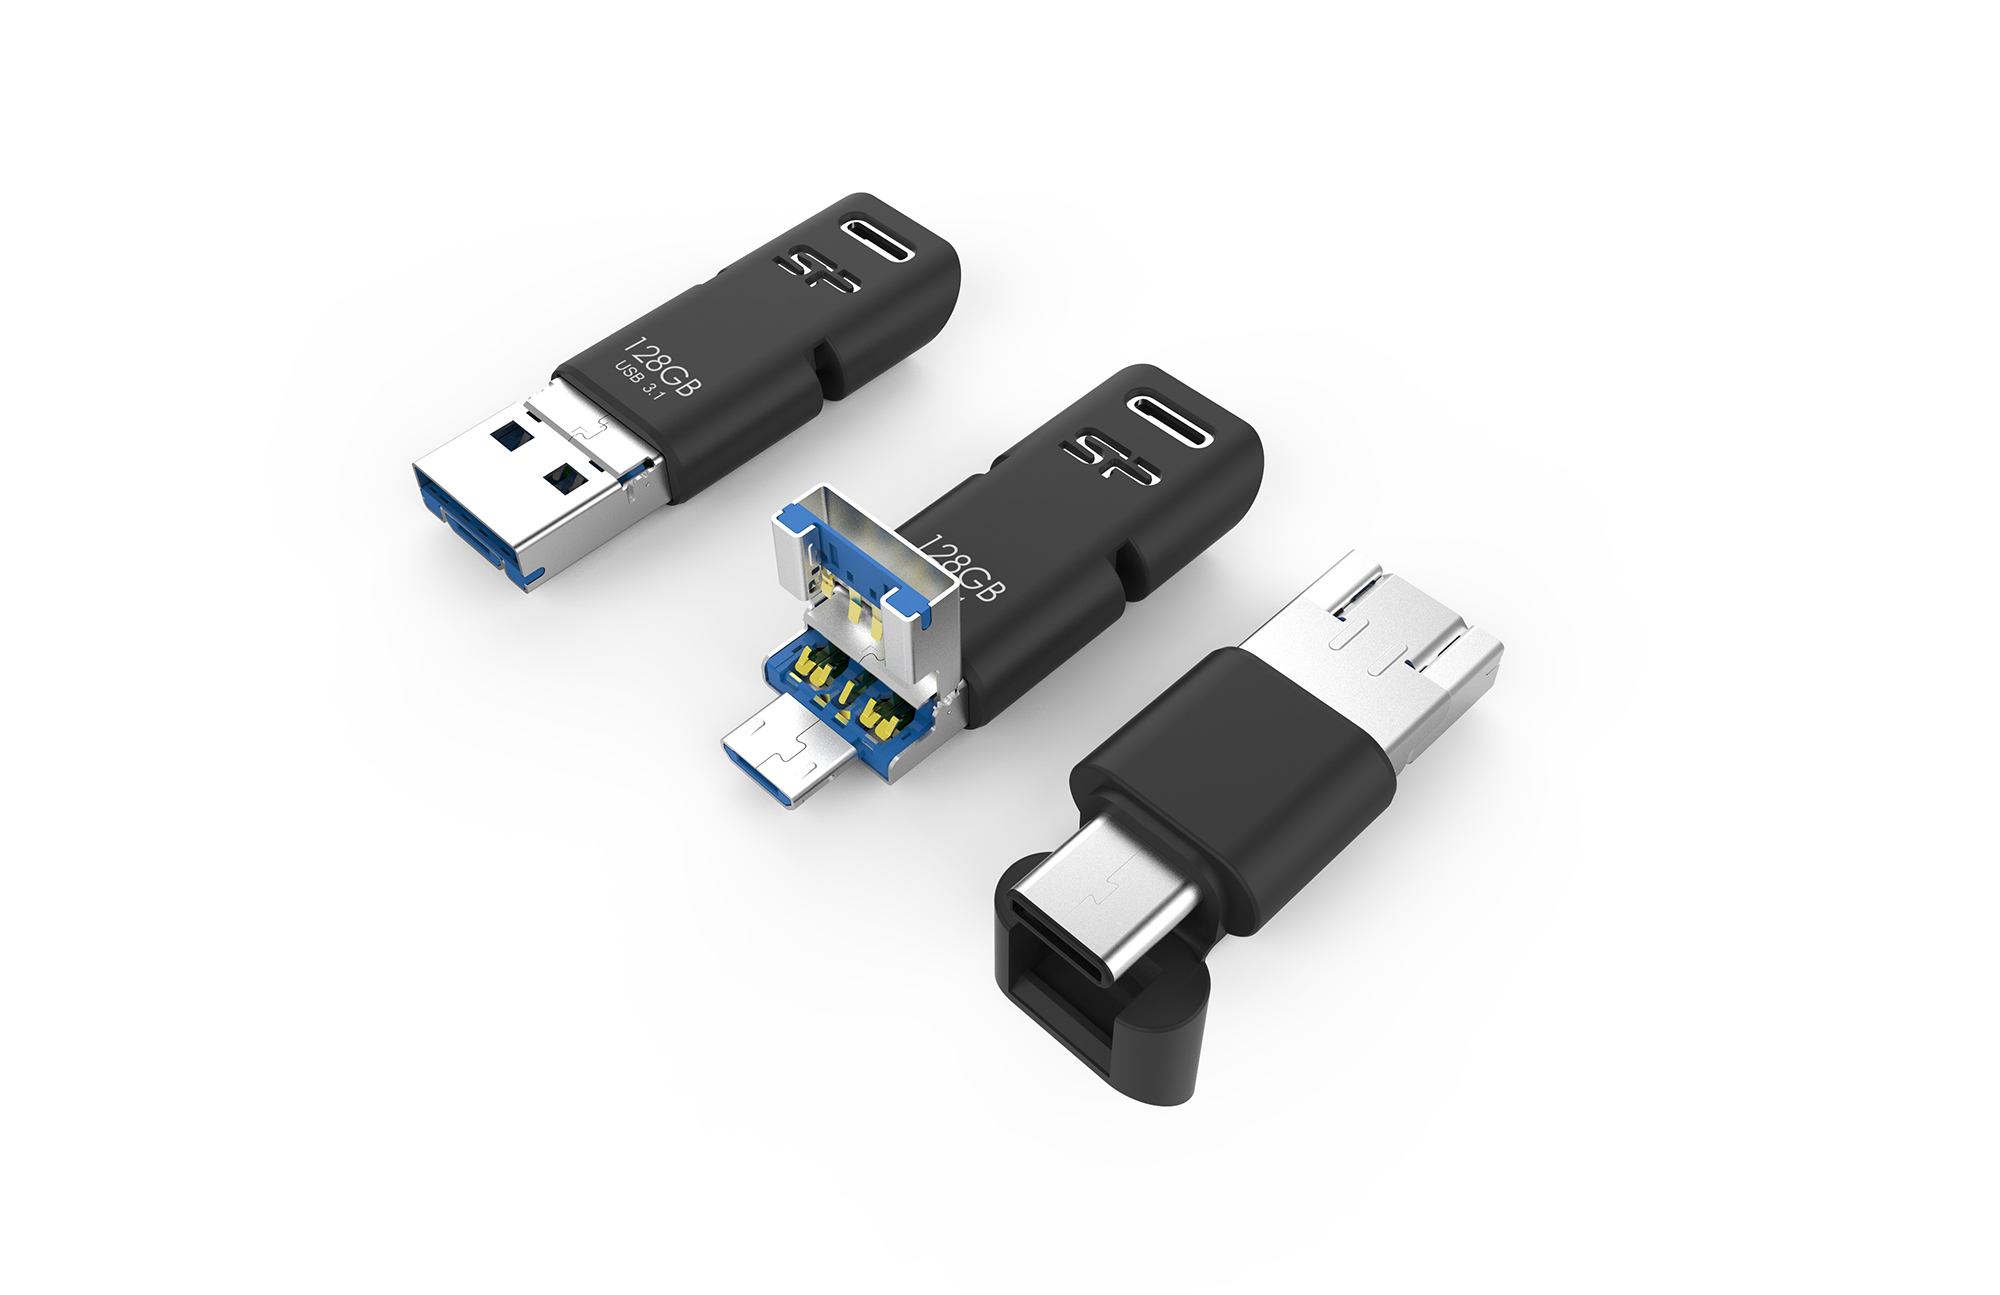 3in1 Mobile OTG USB Flash Drive